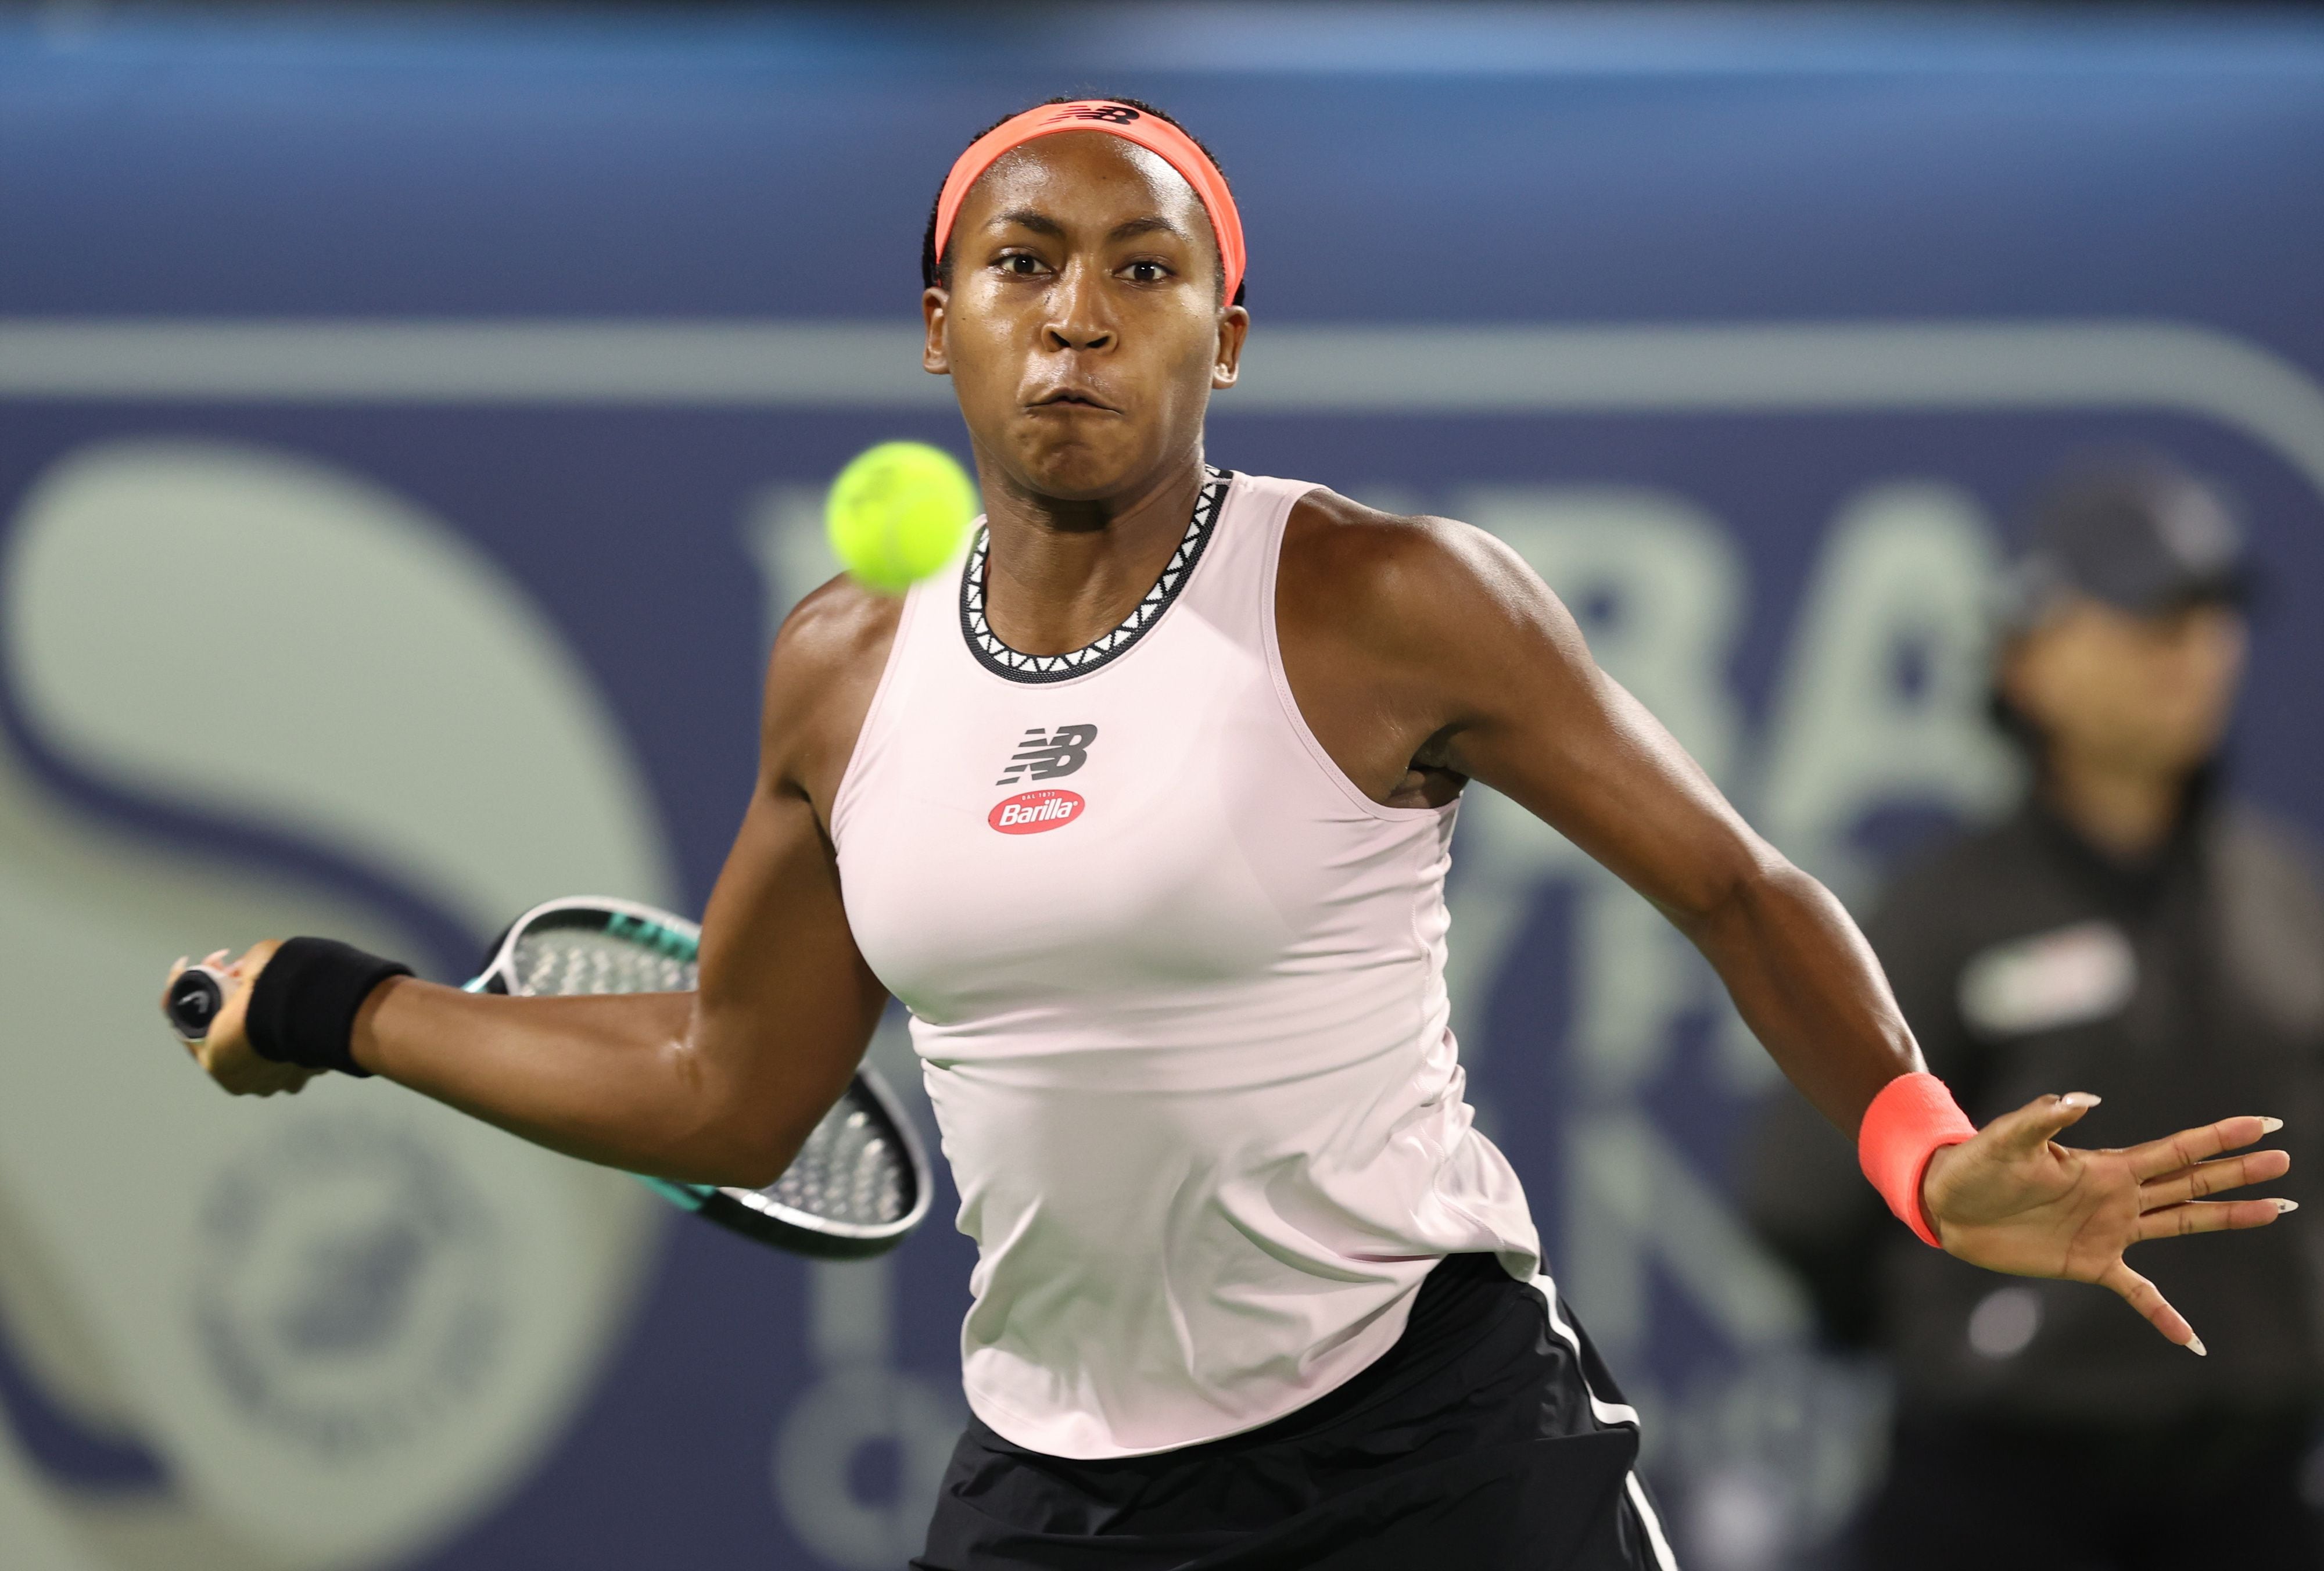 Coco Gauff on adulthood, Gaza, advocating for change and dreams of greatness